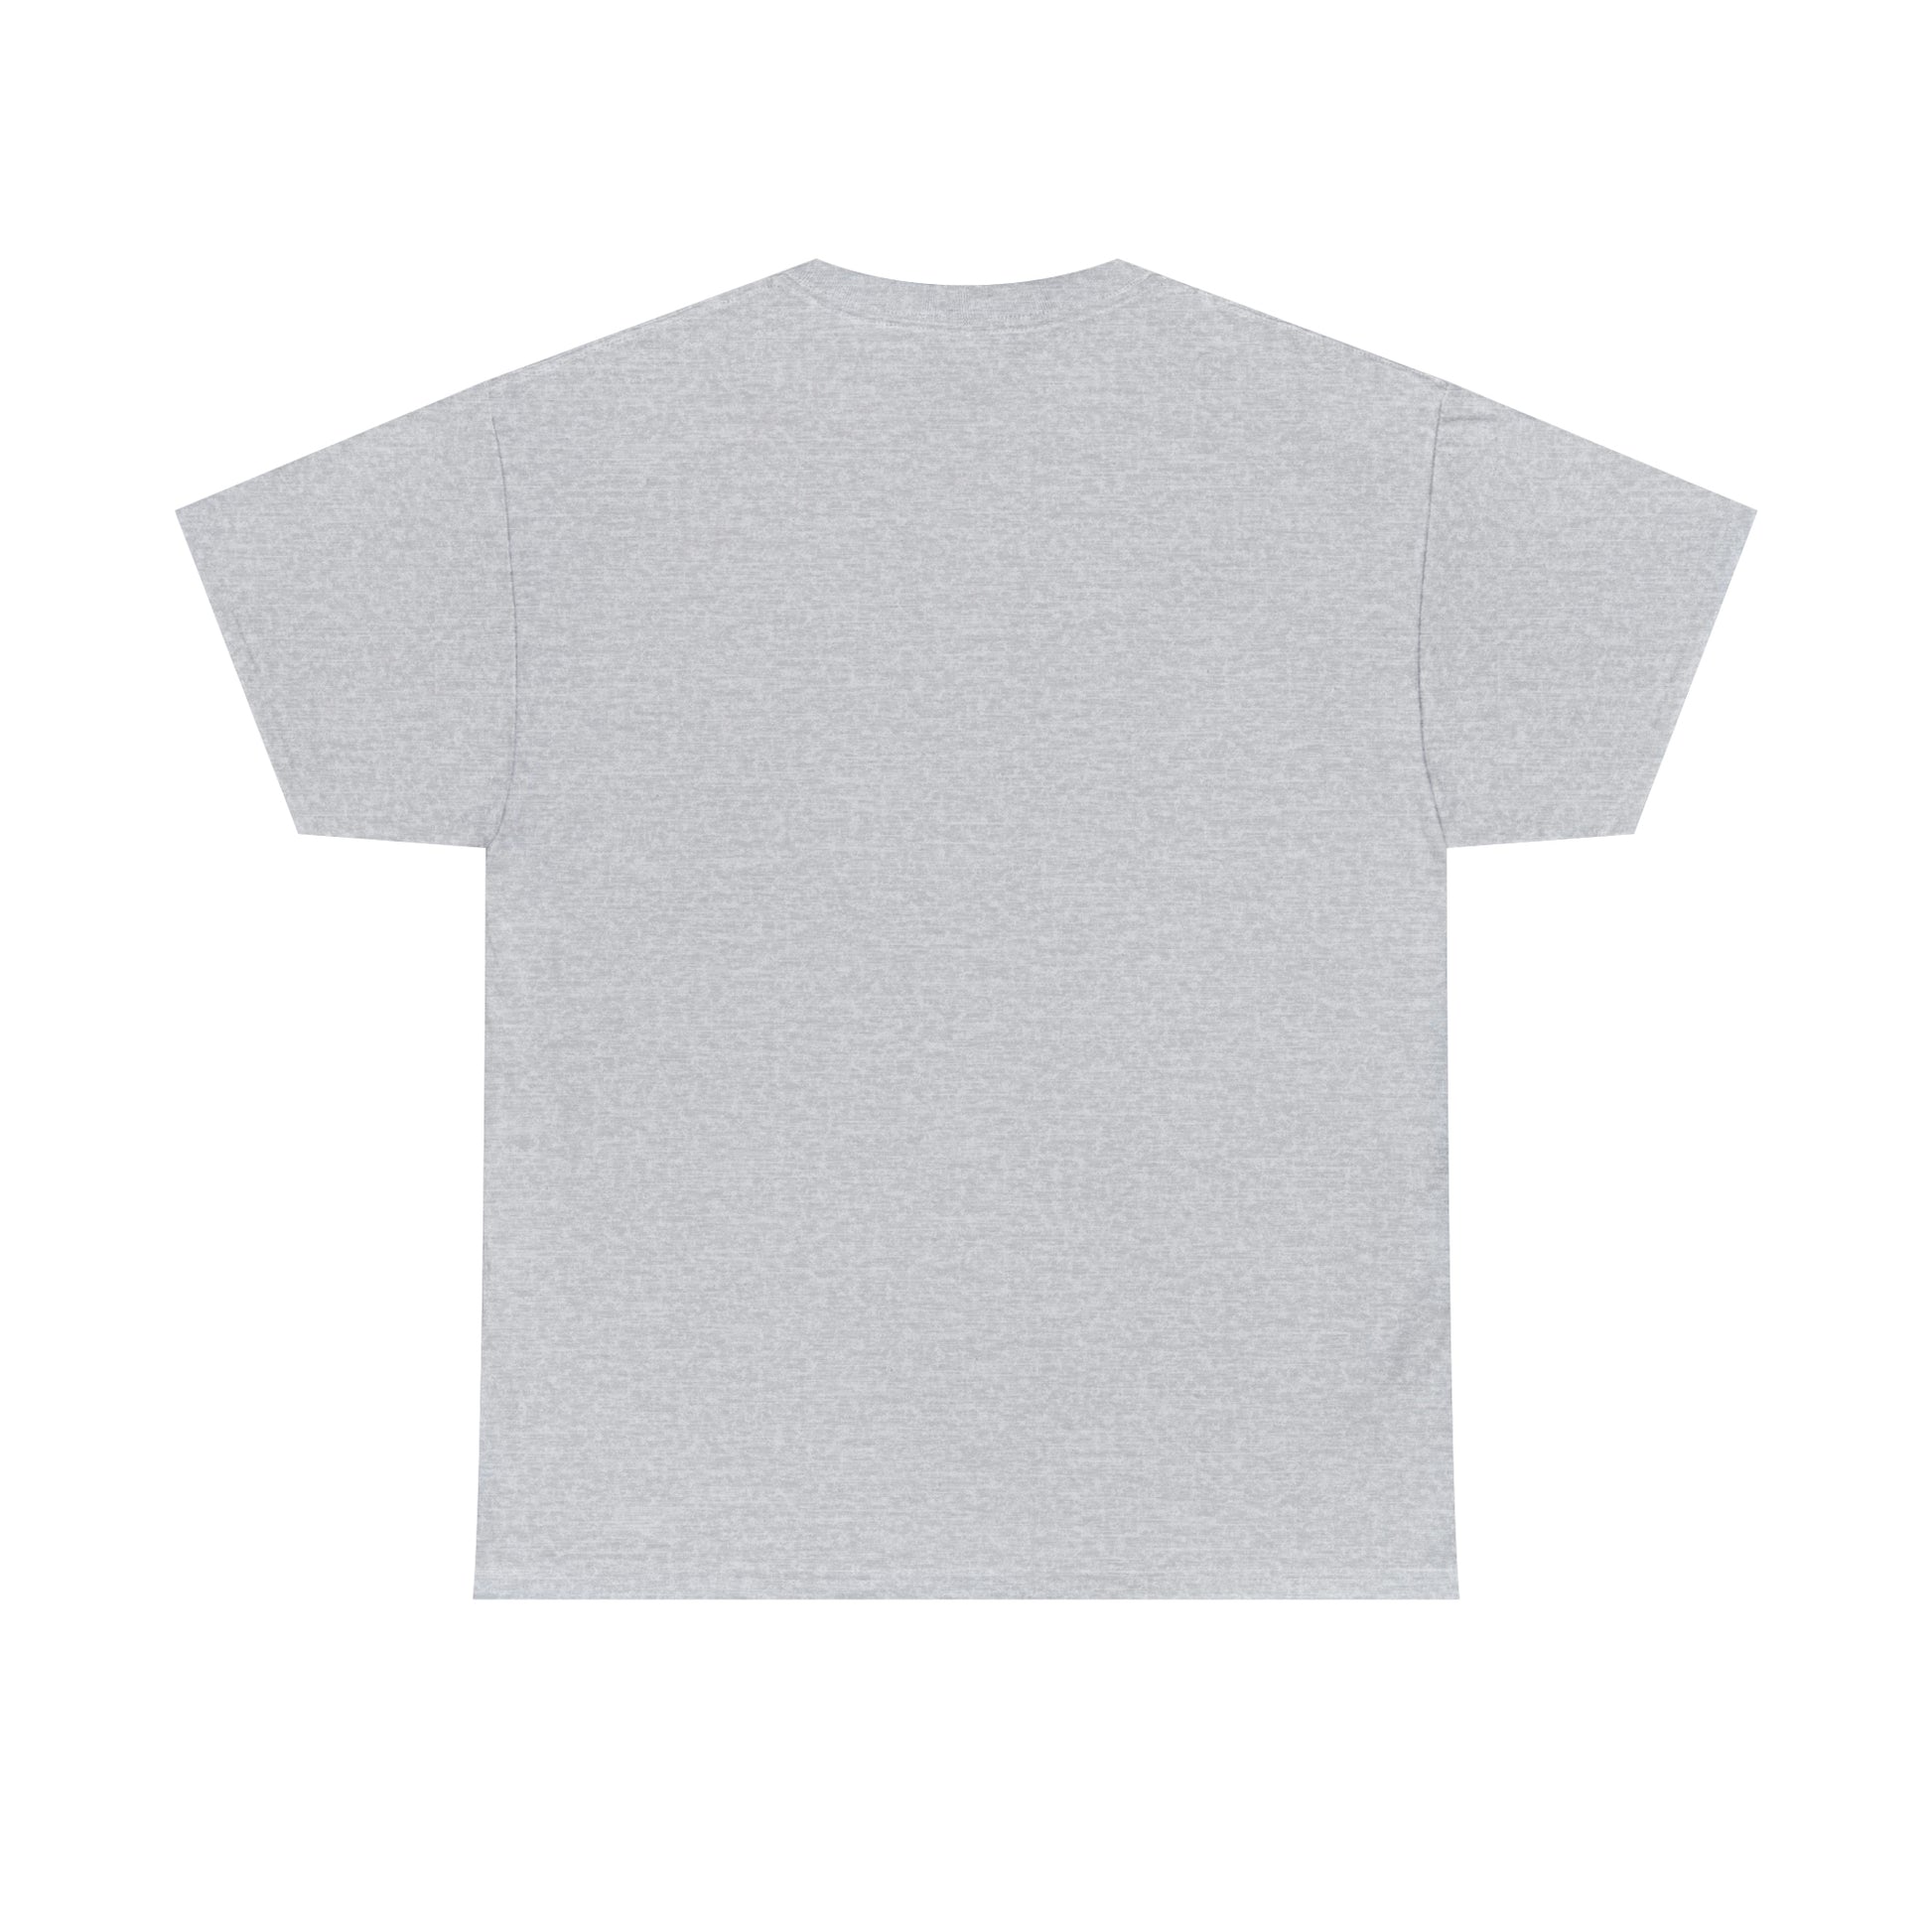 Flat back view of the Sports Grey T-shirt